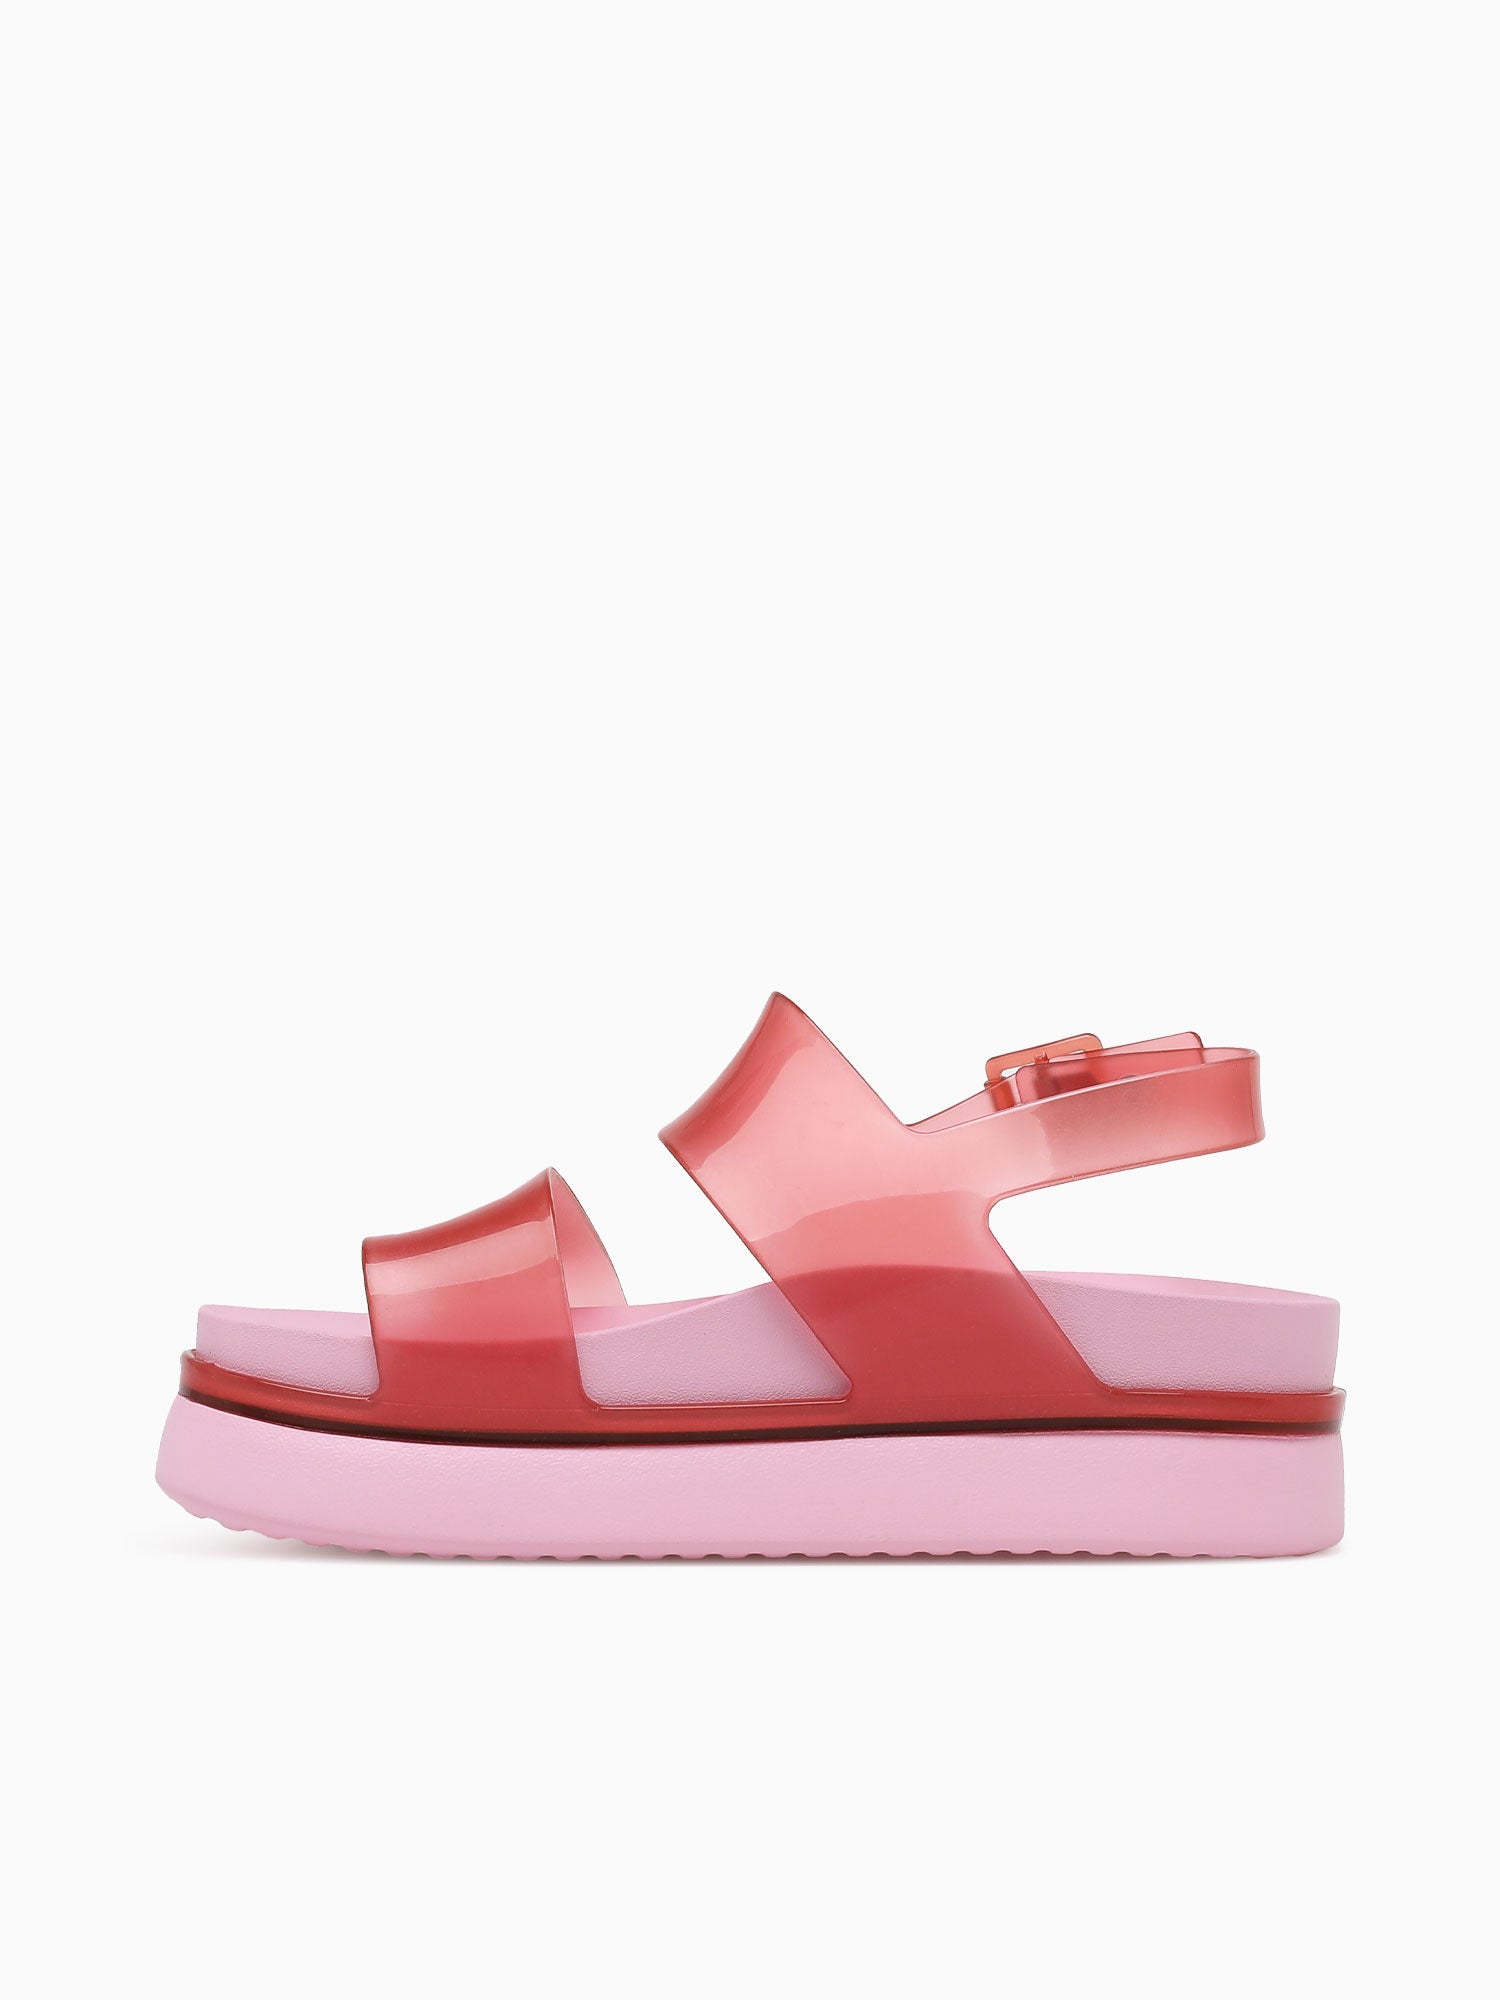 Cosmic Sandal Next Red Pink jelly Red / 5 / M